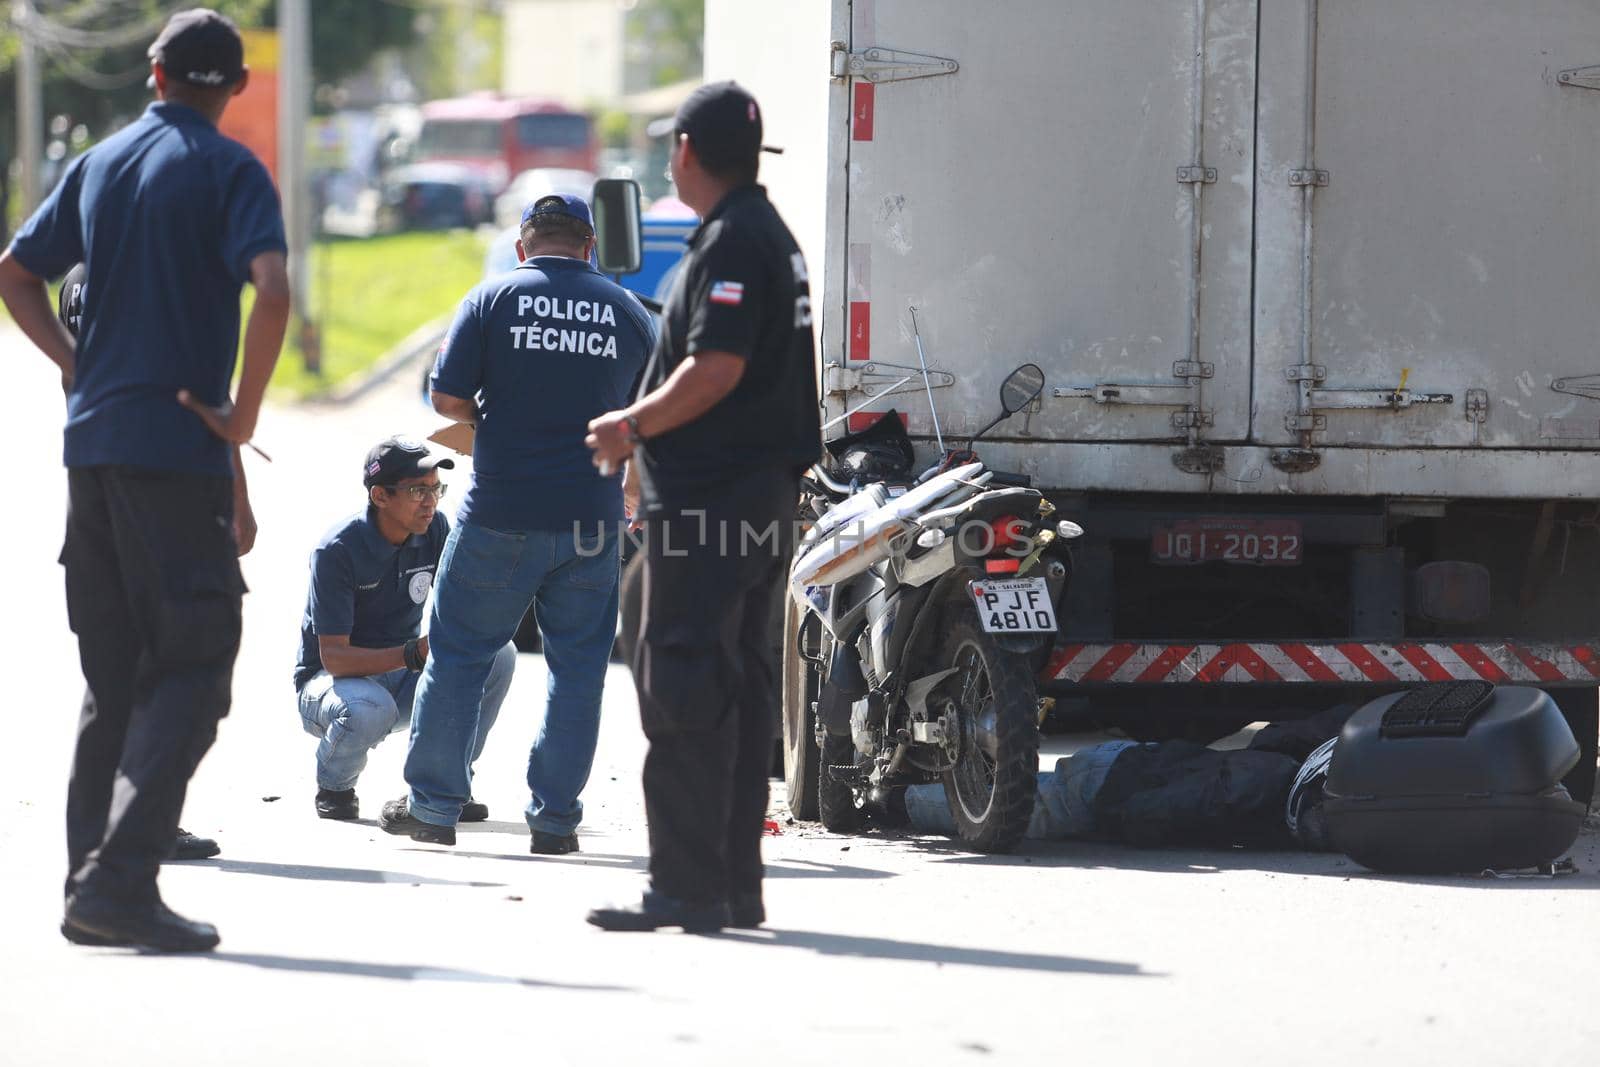 salvador, bahia / brazil - june 18, 2015: Technical Police forensic in traffic accident on Luiz Viana Avenue in Salvador. A man died while colliding a motorcycle in the bottom of a truck.